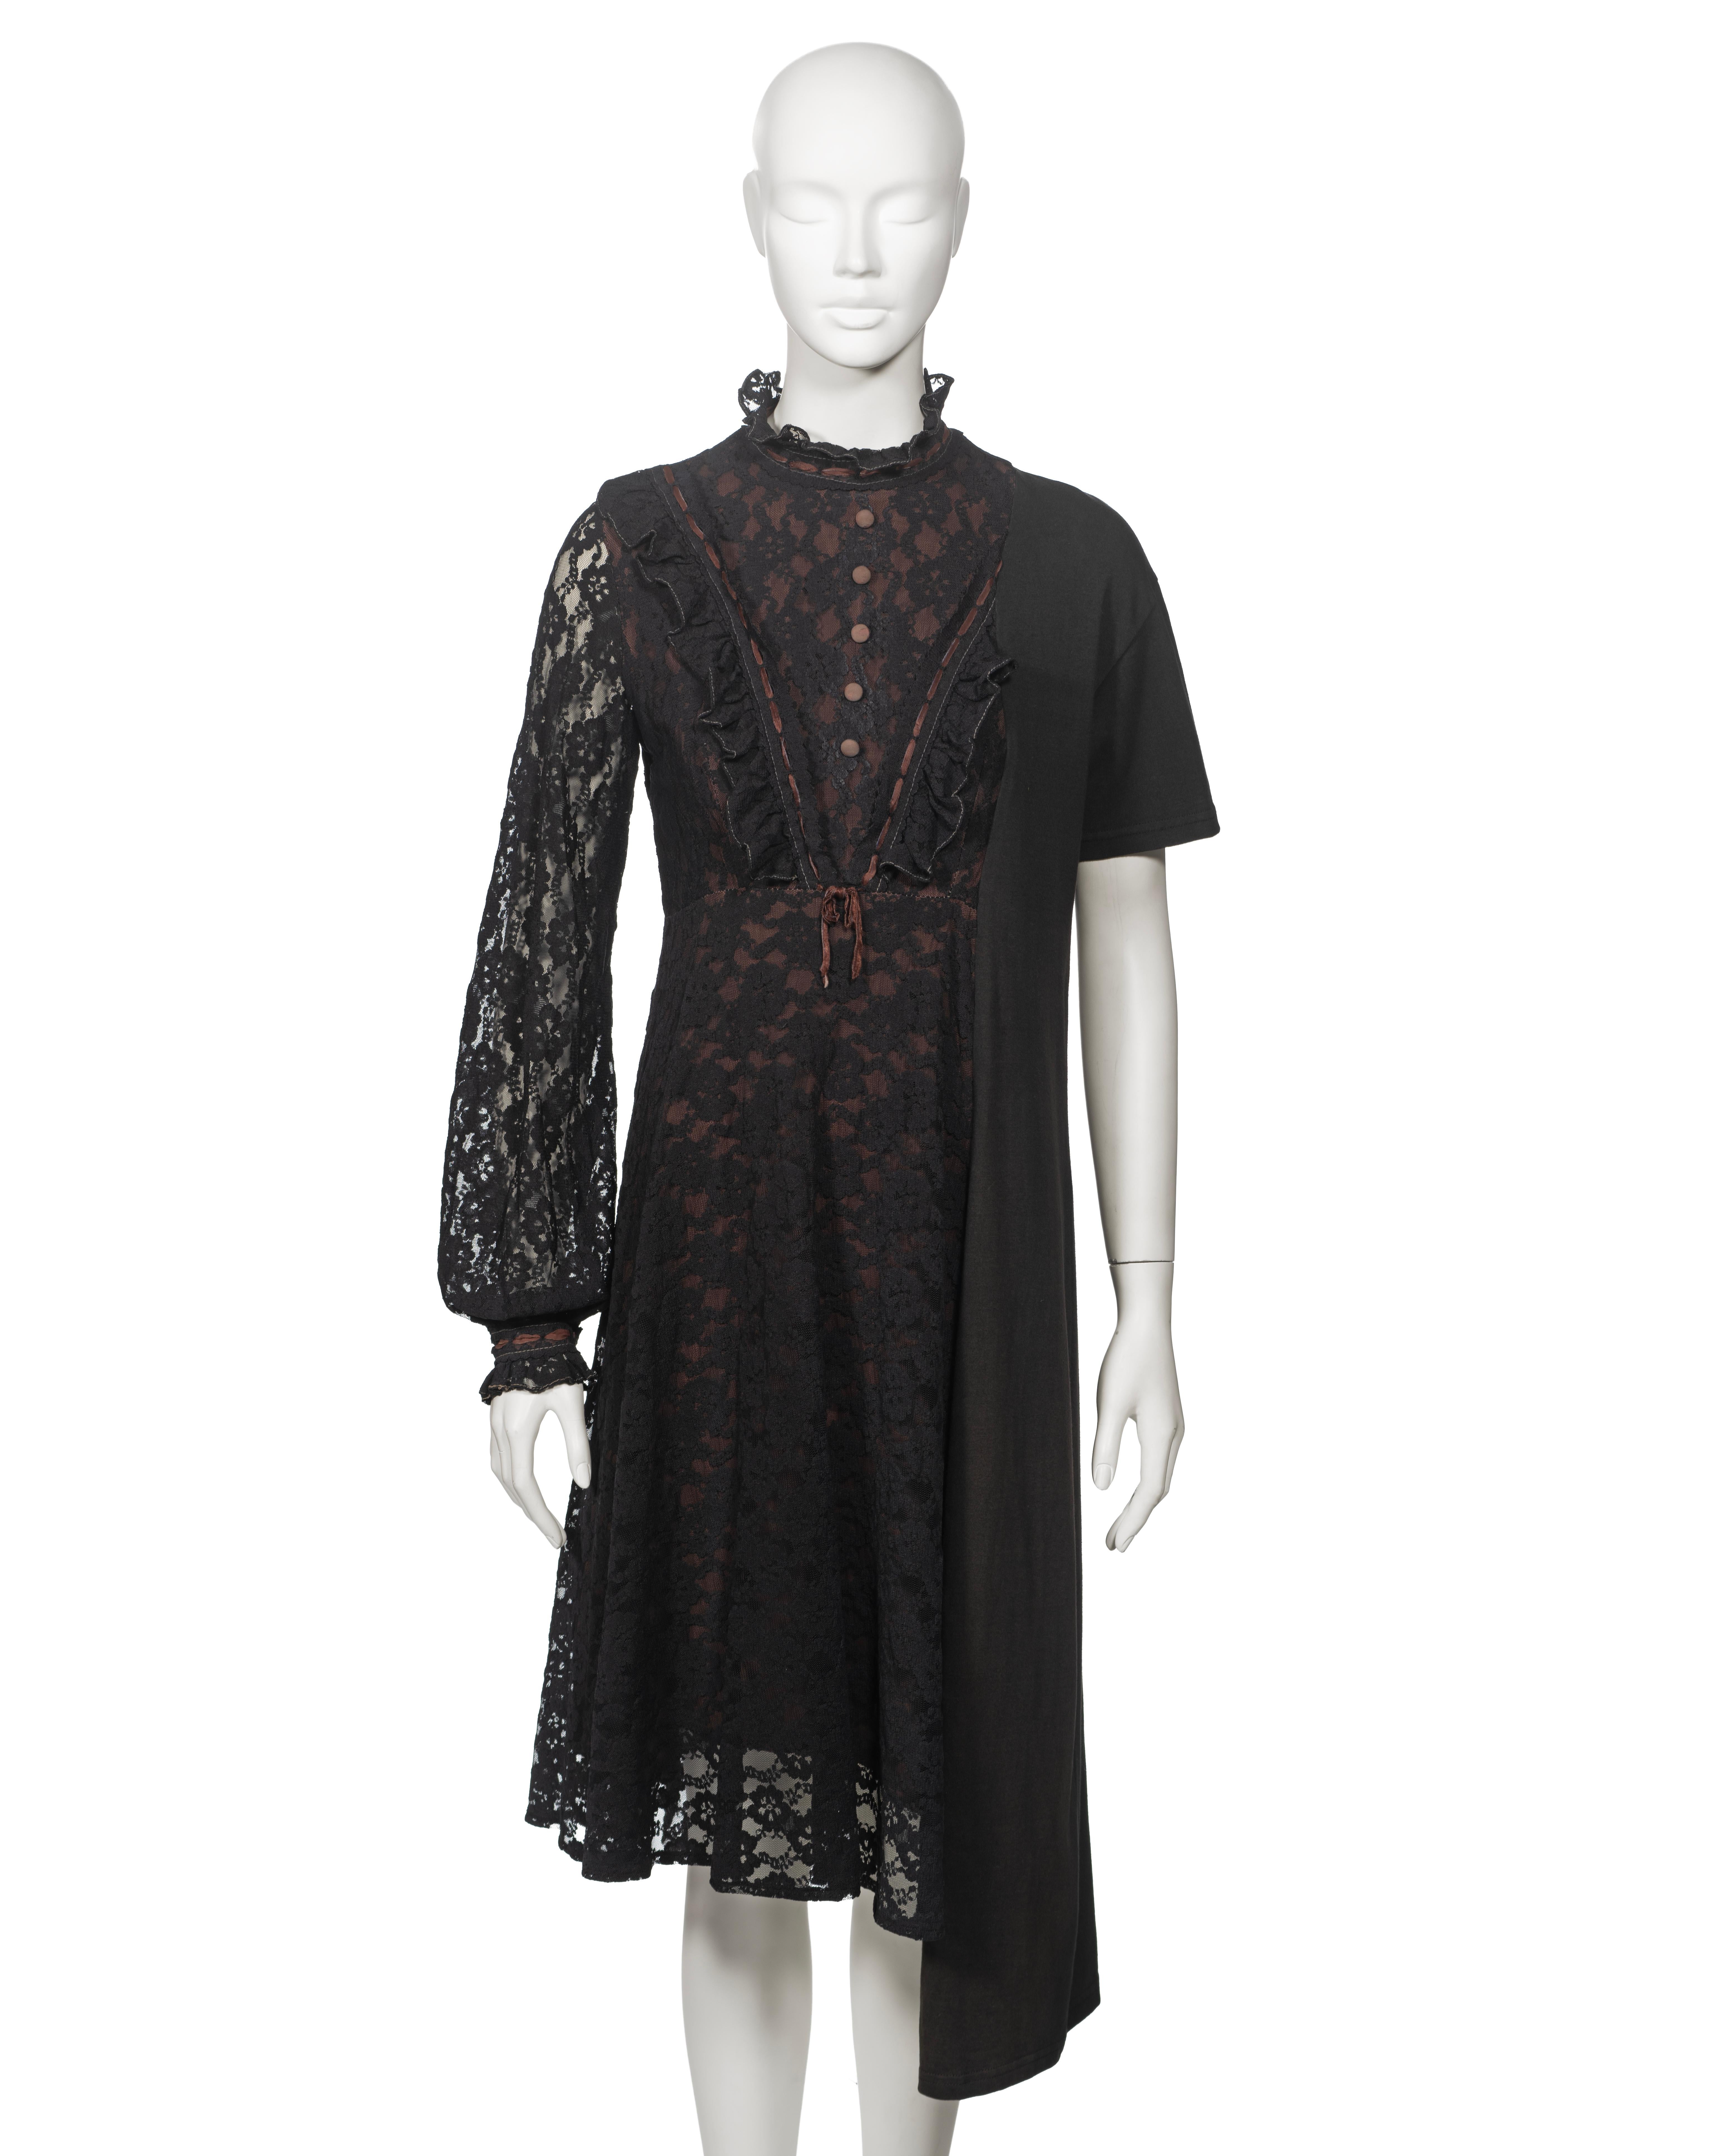 Martin Margiela Artisanal Dress Made From Two Vintage Dresses, fw 2003 In Good Condition For Sale In London, GB